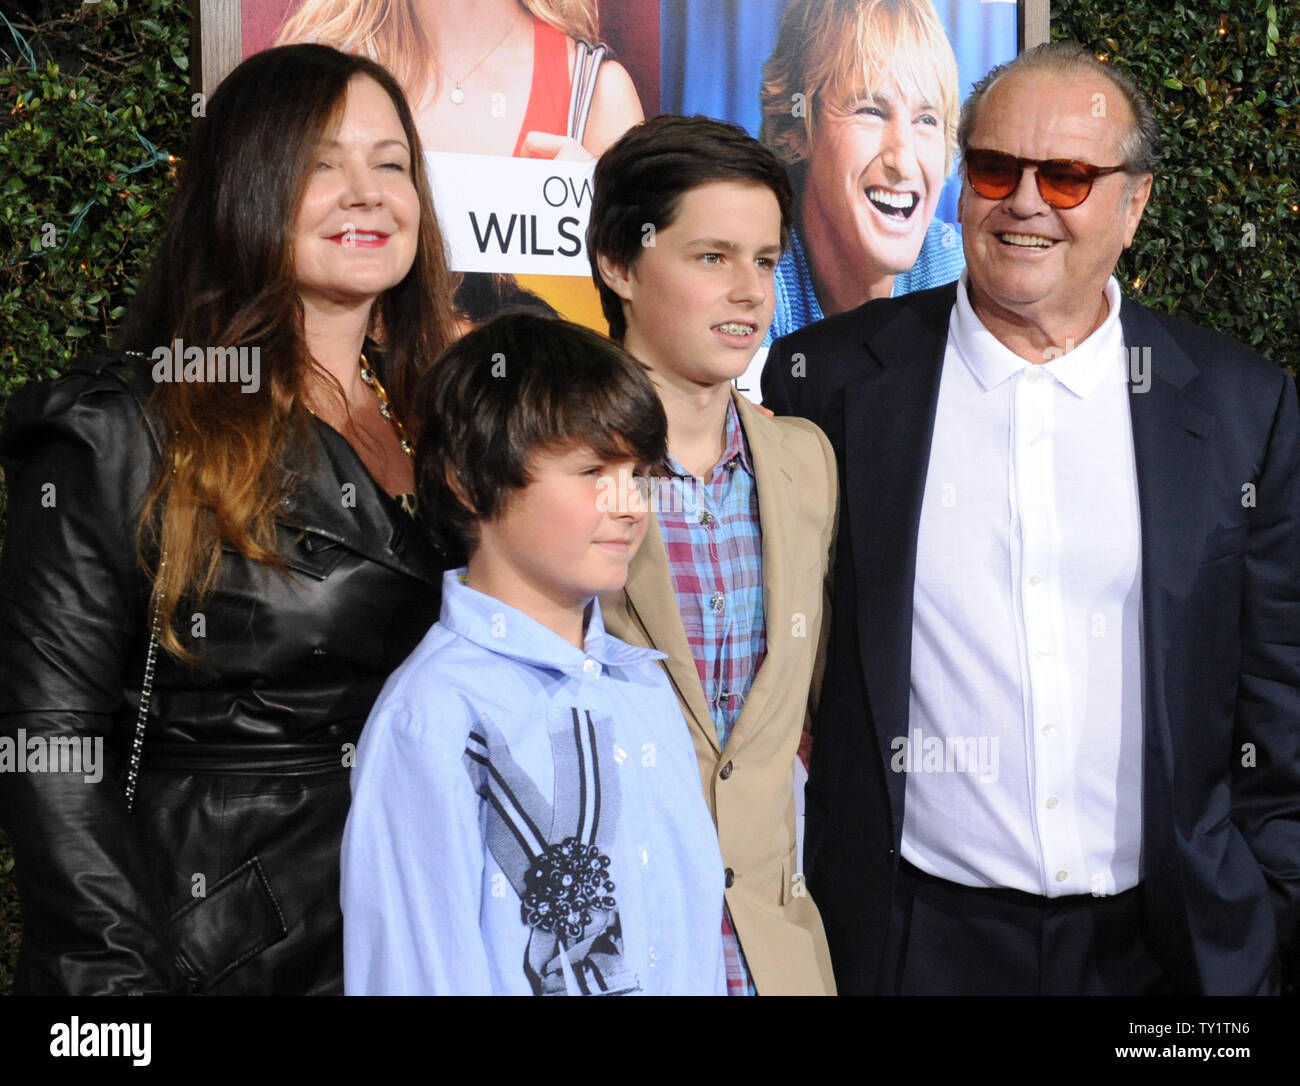 Actor Jack Nicholson (R), a cast member in the motion picture romantic comedy 'How Do You Know', attends the premiere of the film with his daughter Jennifer Nicholson and her sons Duke (2nd-L) and Sean at the Mann Village Theatre in the Westwood section of Los Angeles on December 13, 2010. UPI/Jim Ruymen Stock Photo